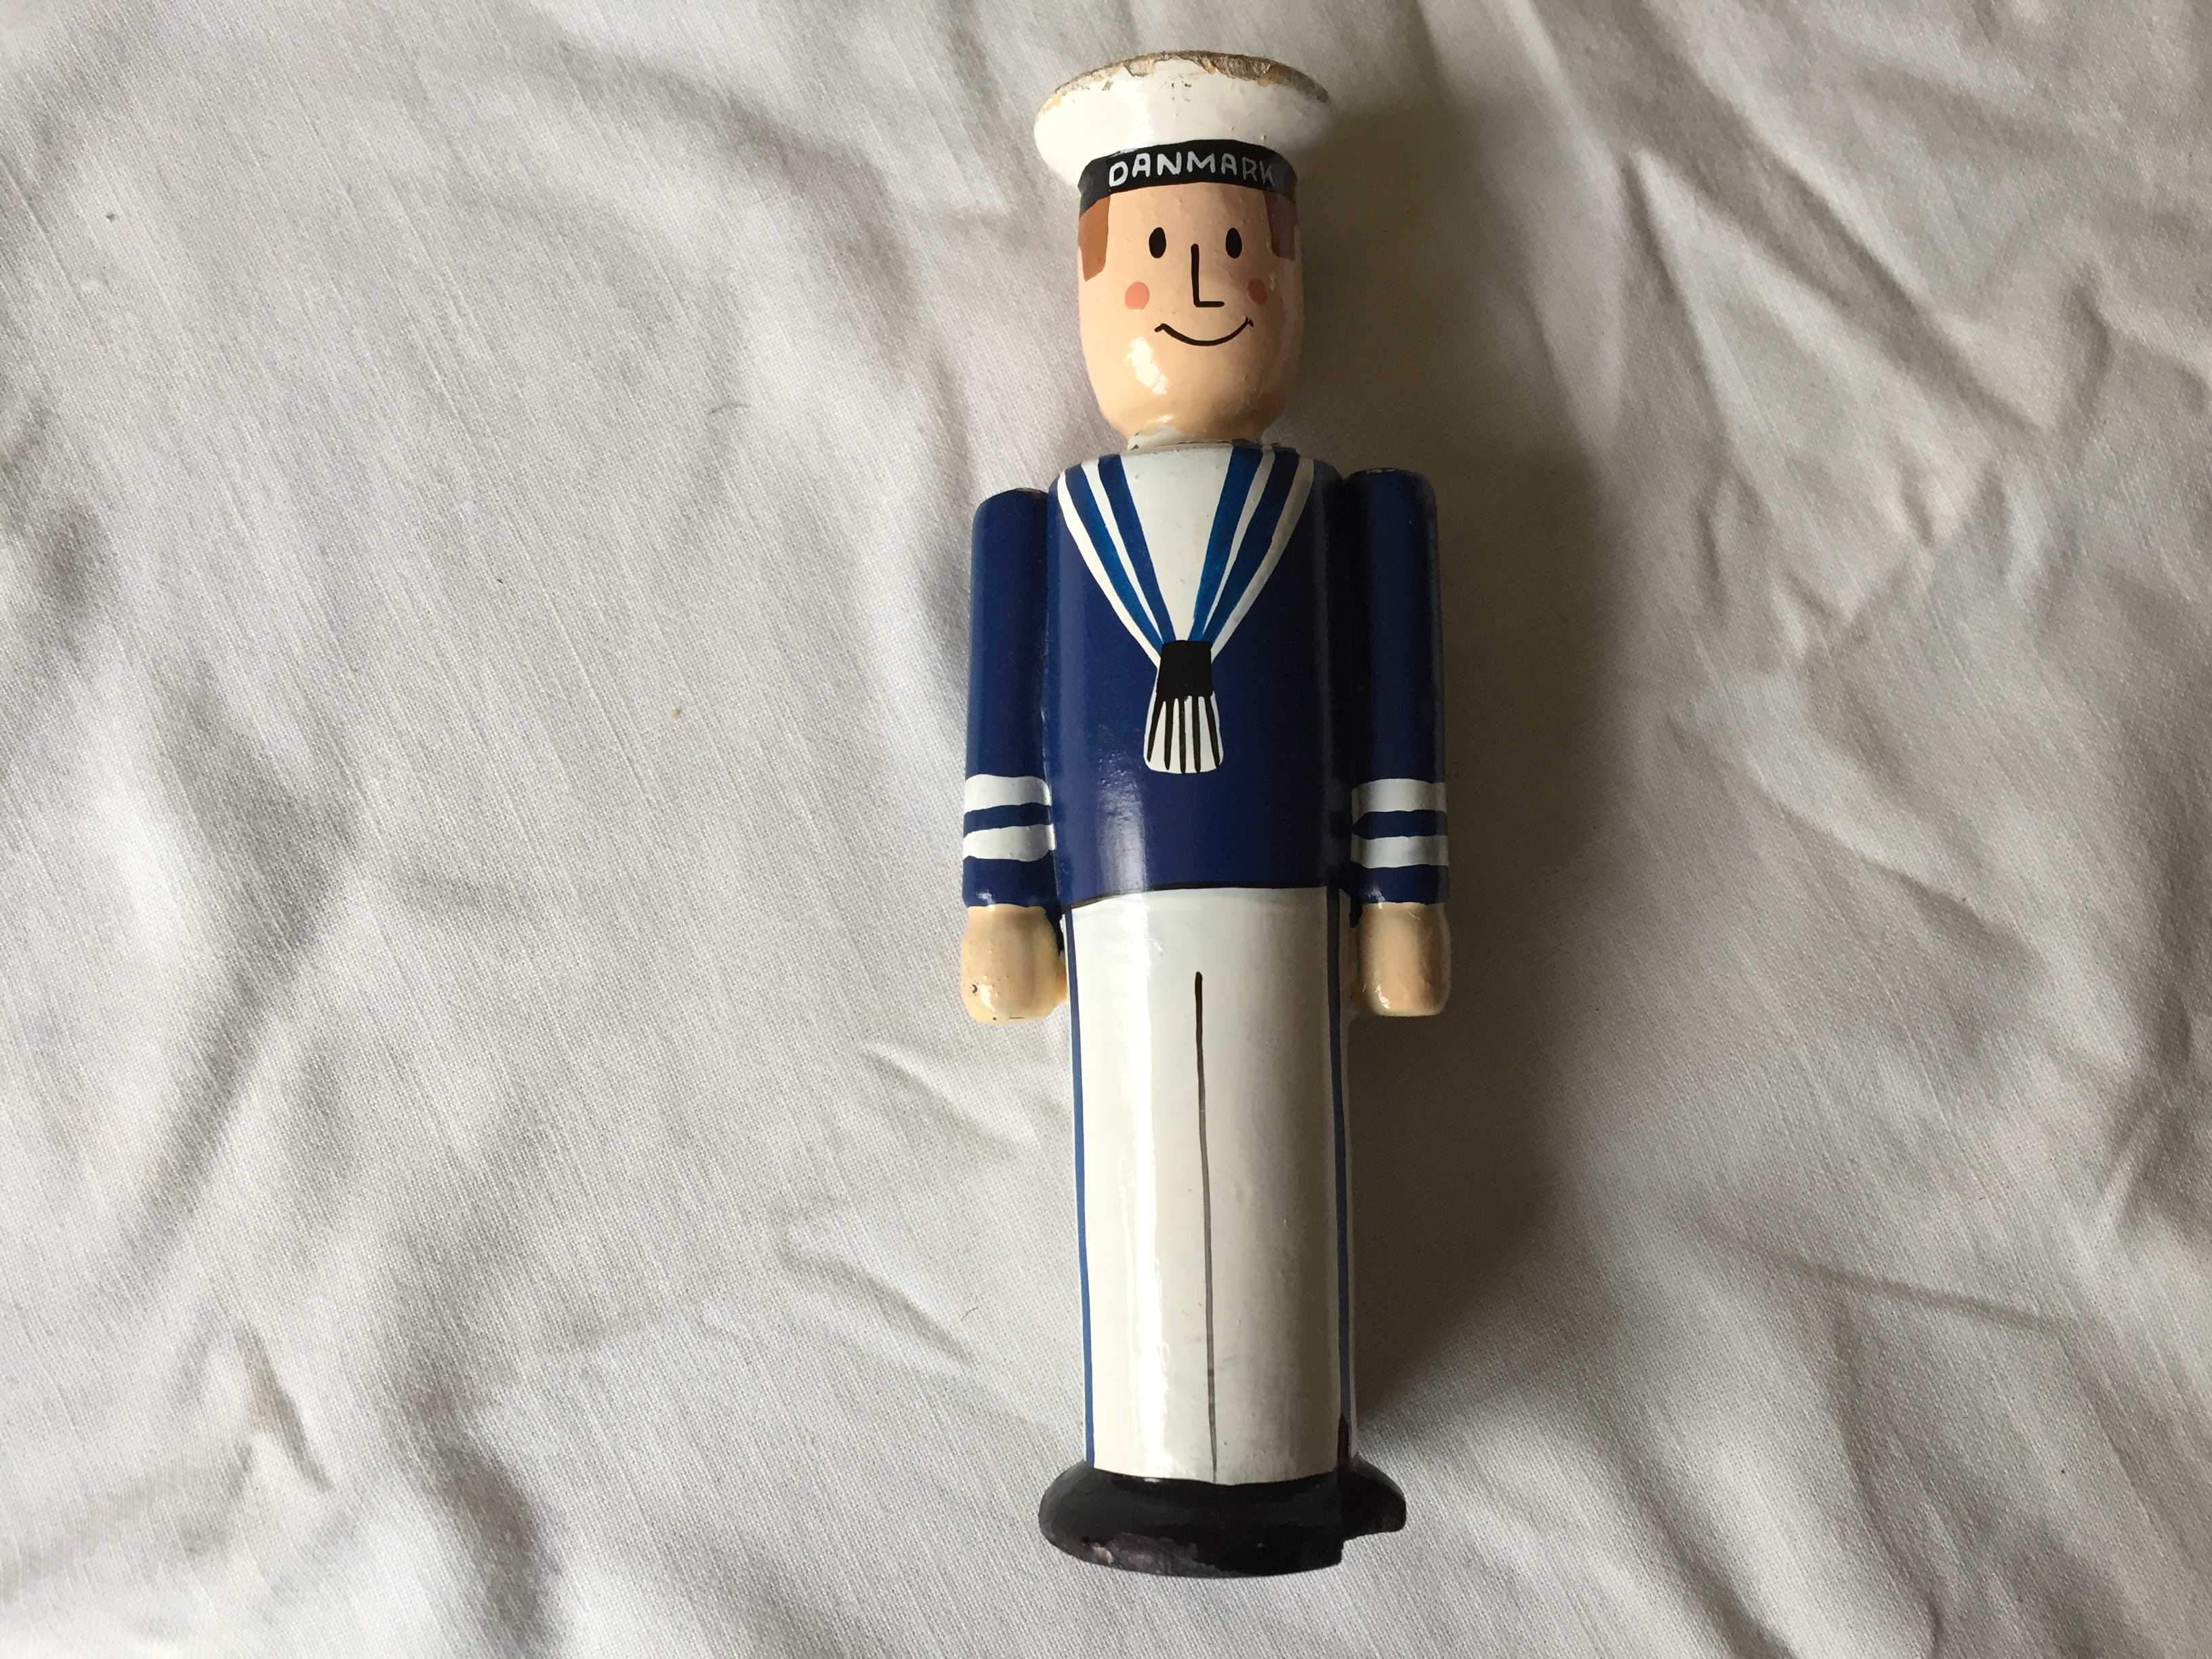 VERY EARLY MODEL WOODEN SAILOR FROM THE DANISH SHIPPING TRAINING VESSEL DANMARK